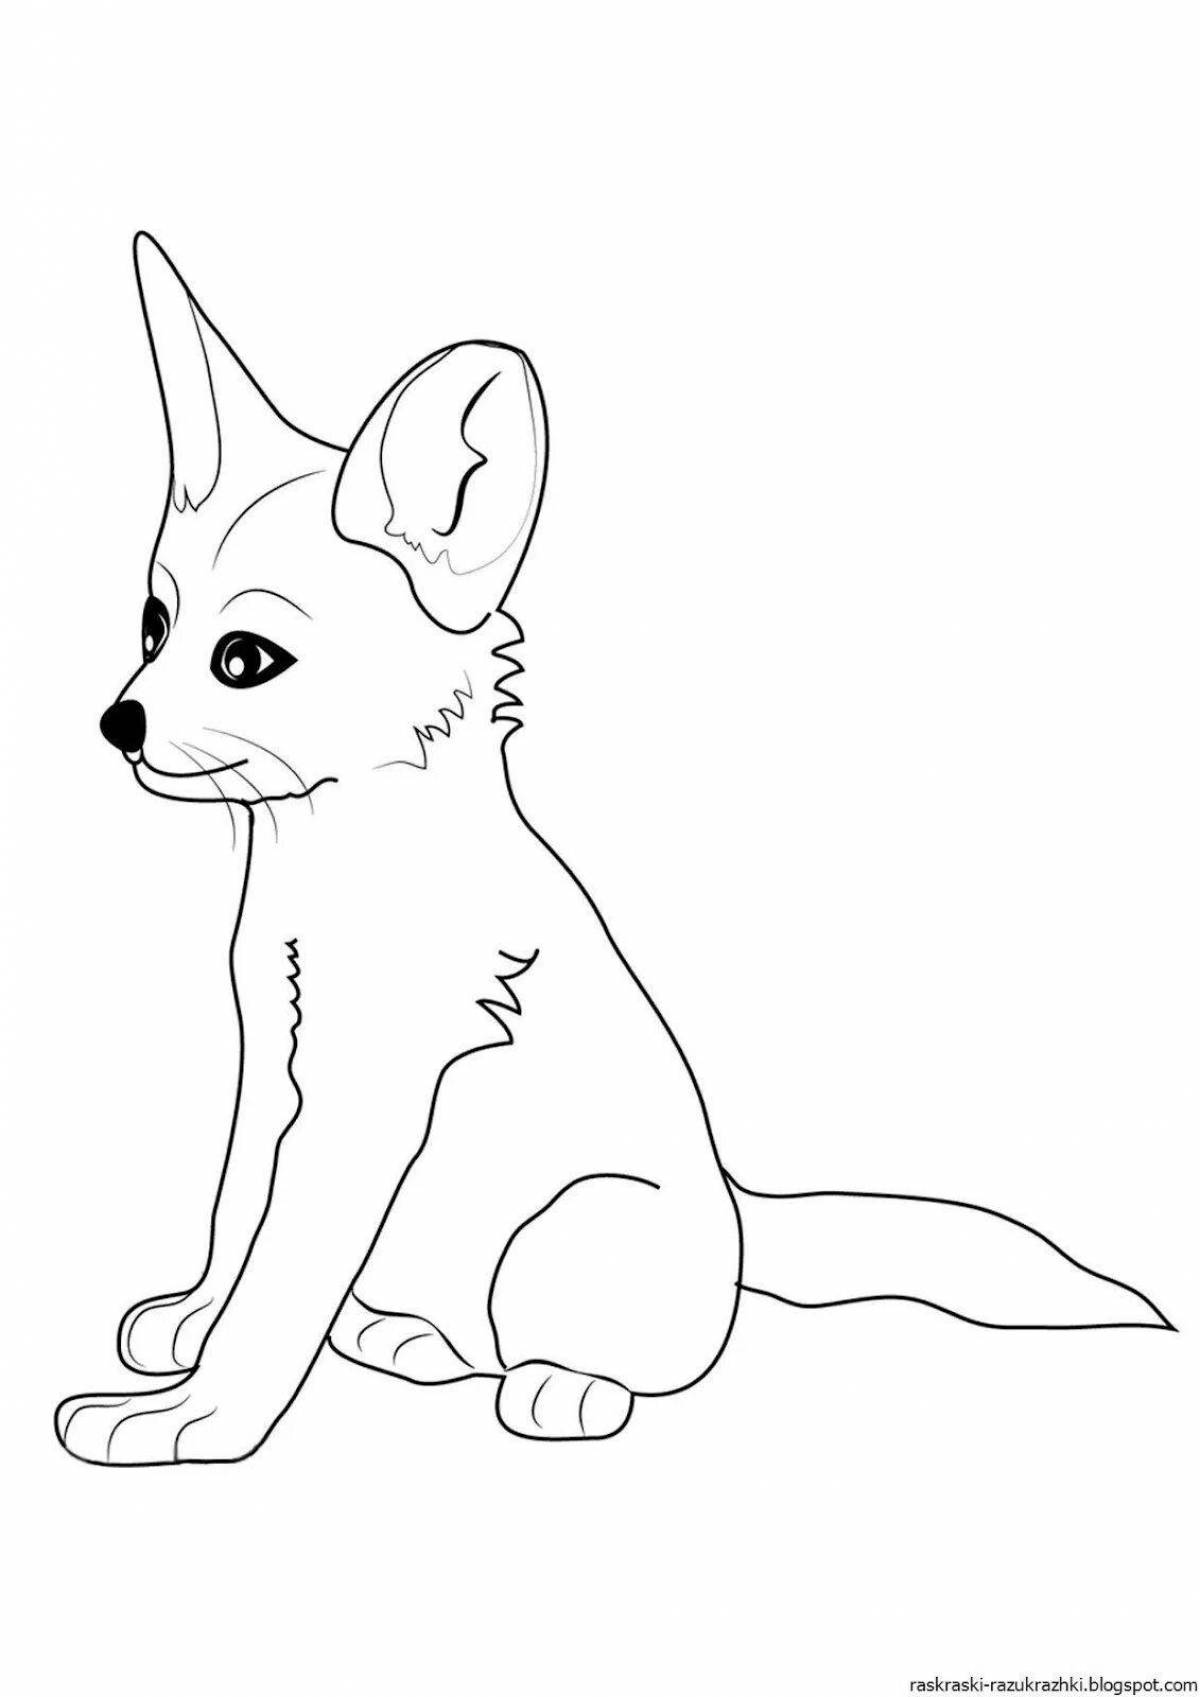 Live coloring fox for girls